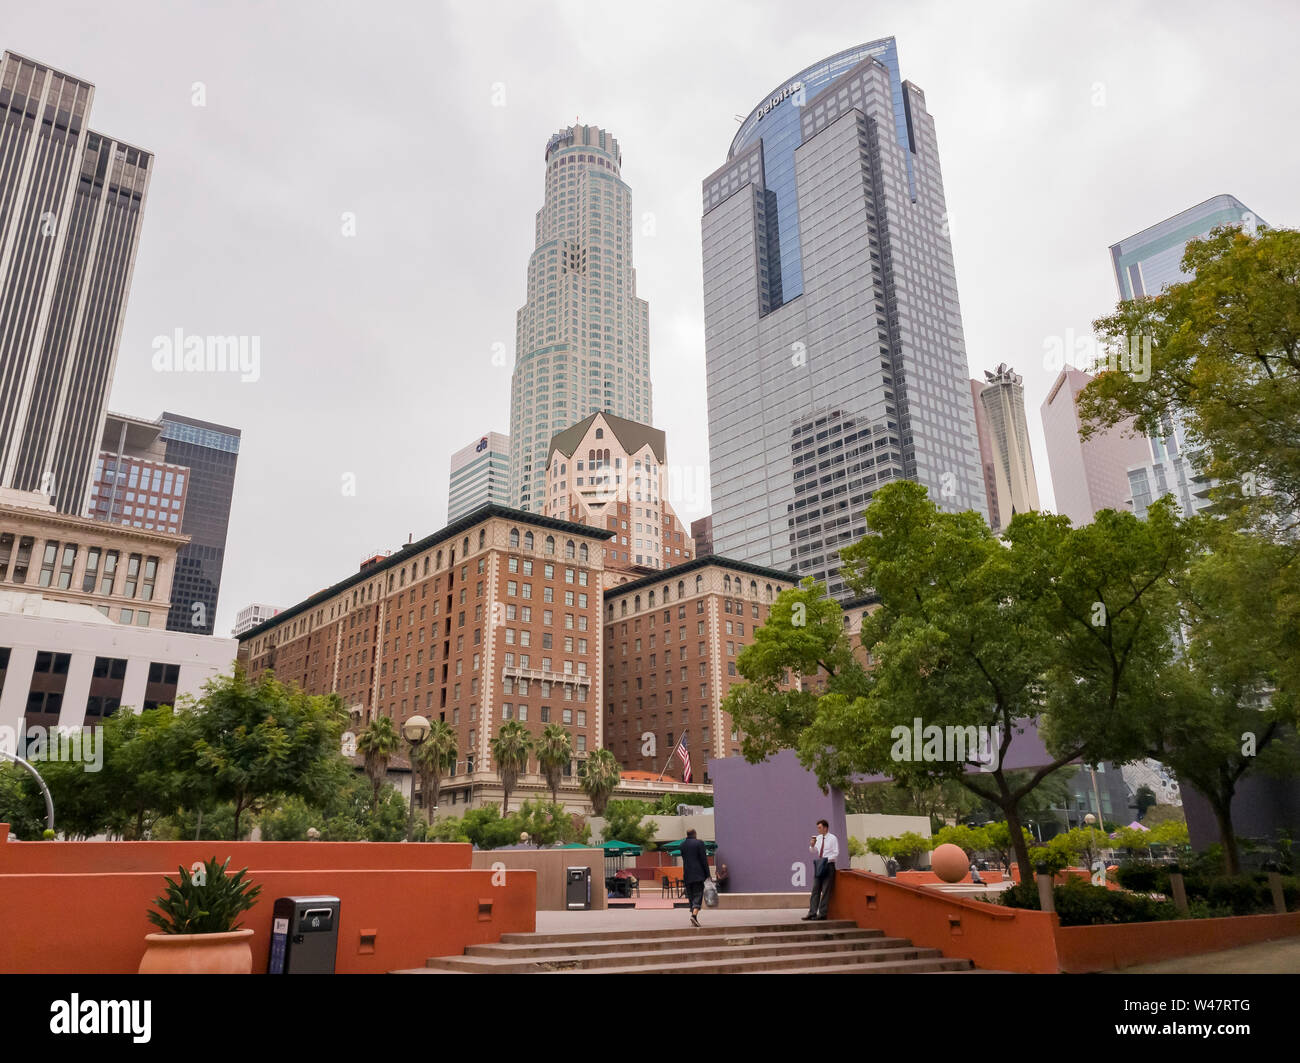 Los Angeles, JUL 8: Morning view of the Pershing Square in downtown on JUL 8, 2019 at Los Angeles, California Stock Photo